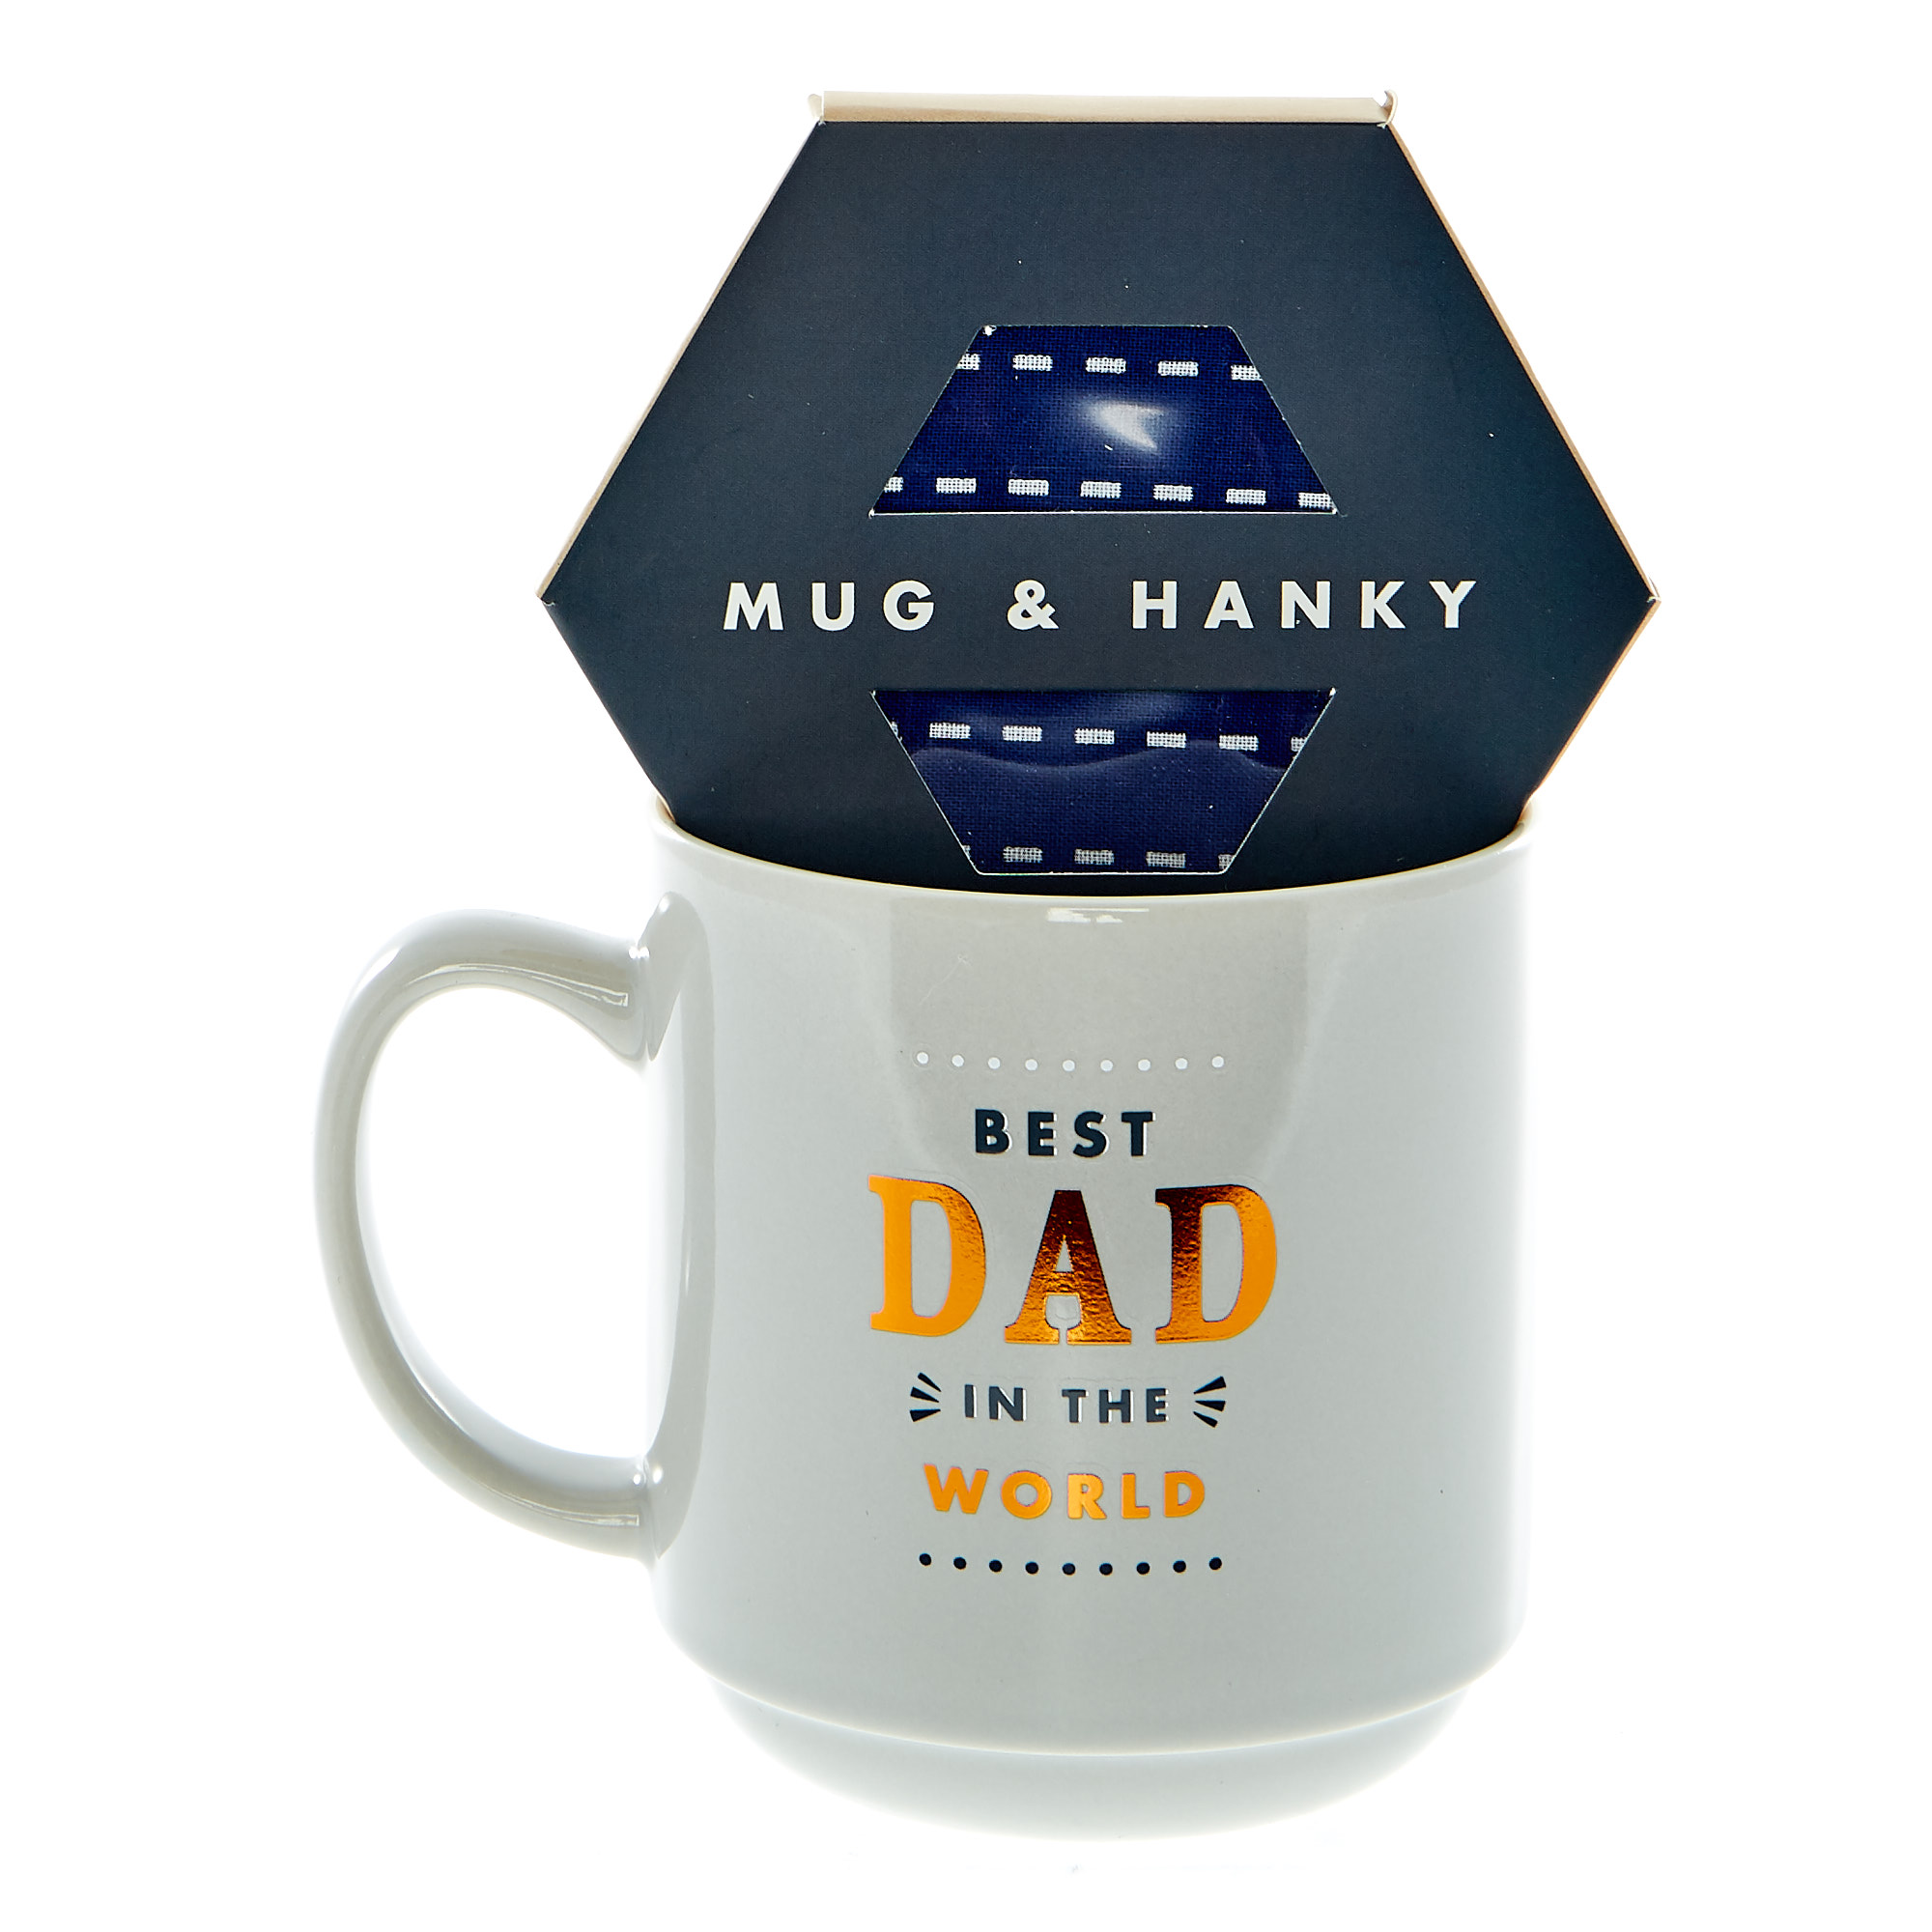 The Best Dad In The World Mug & Hanky Set